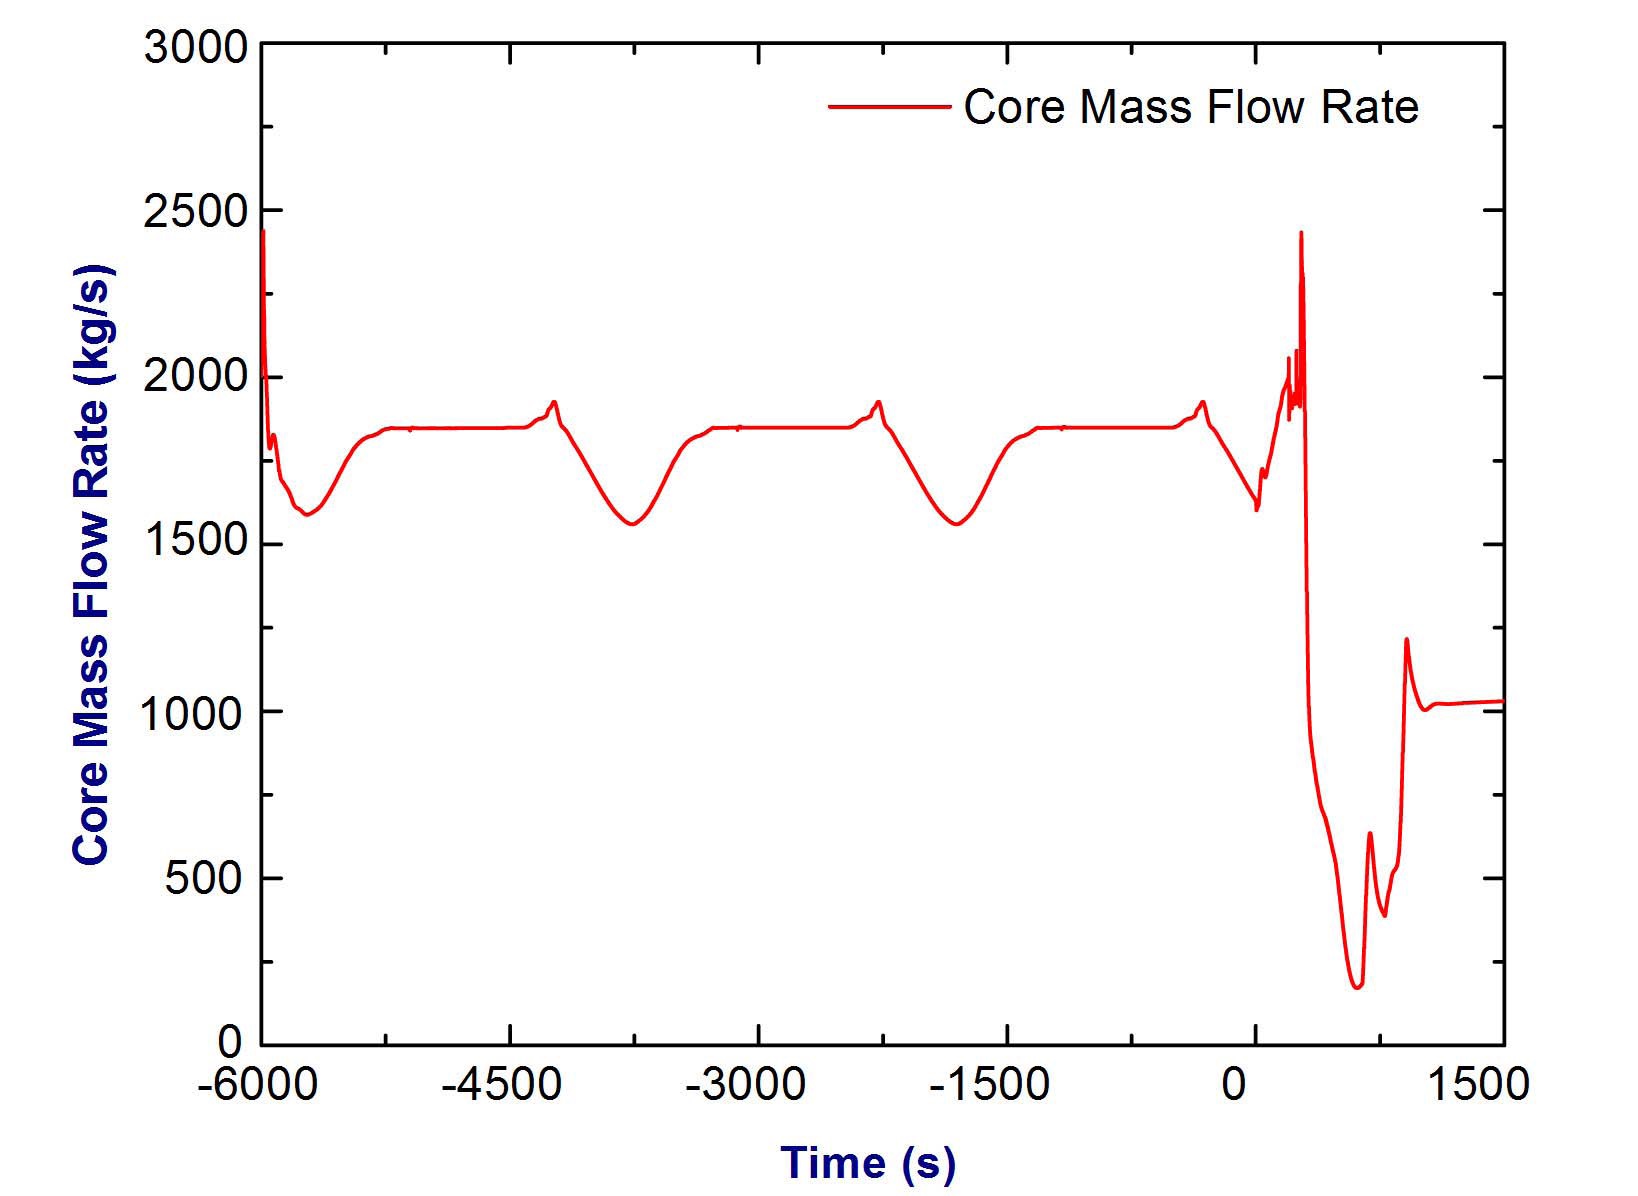 Core Mass Flow Rate at 30% Full Power Condition for Chernobyl-like Accident